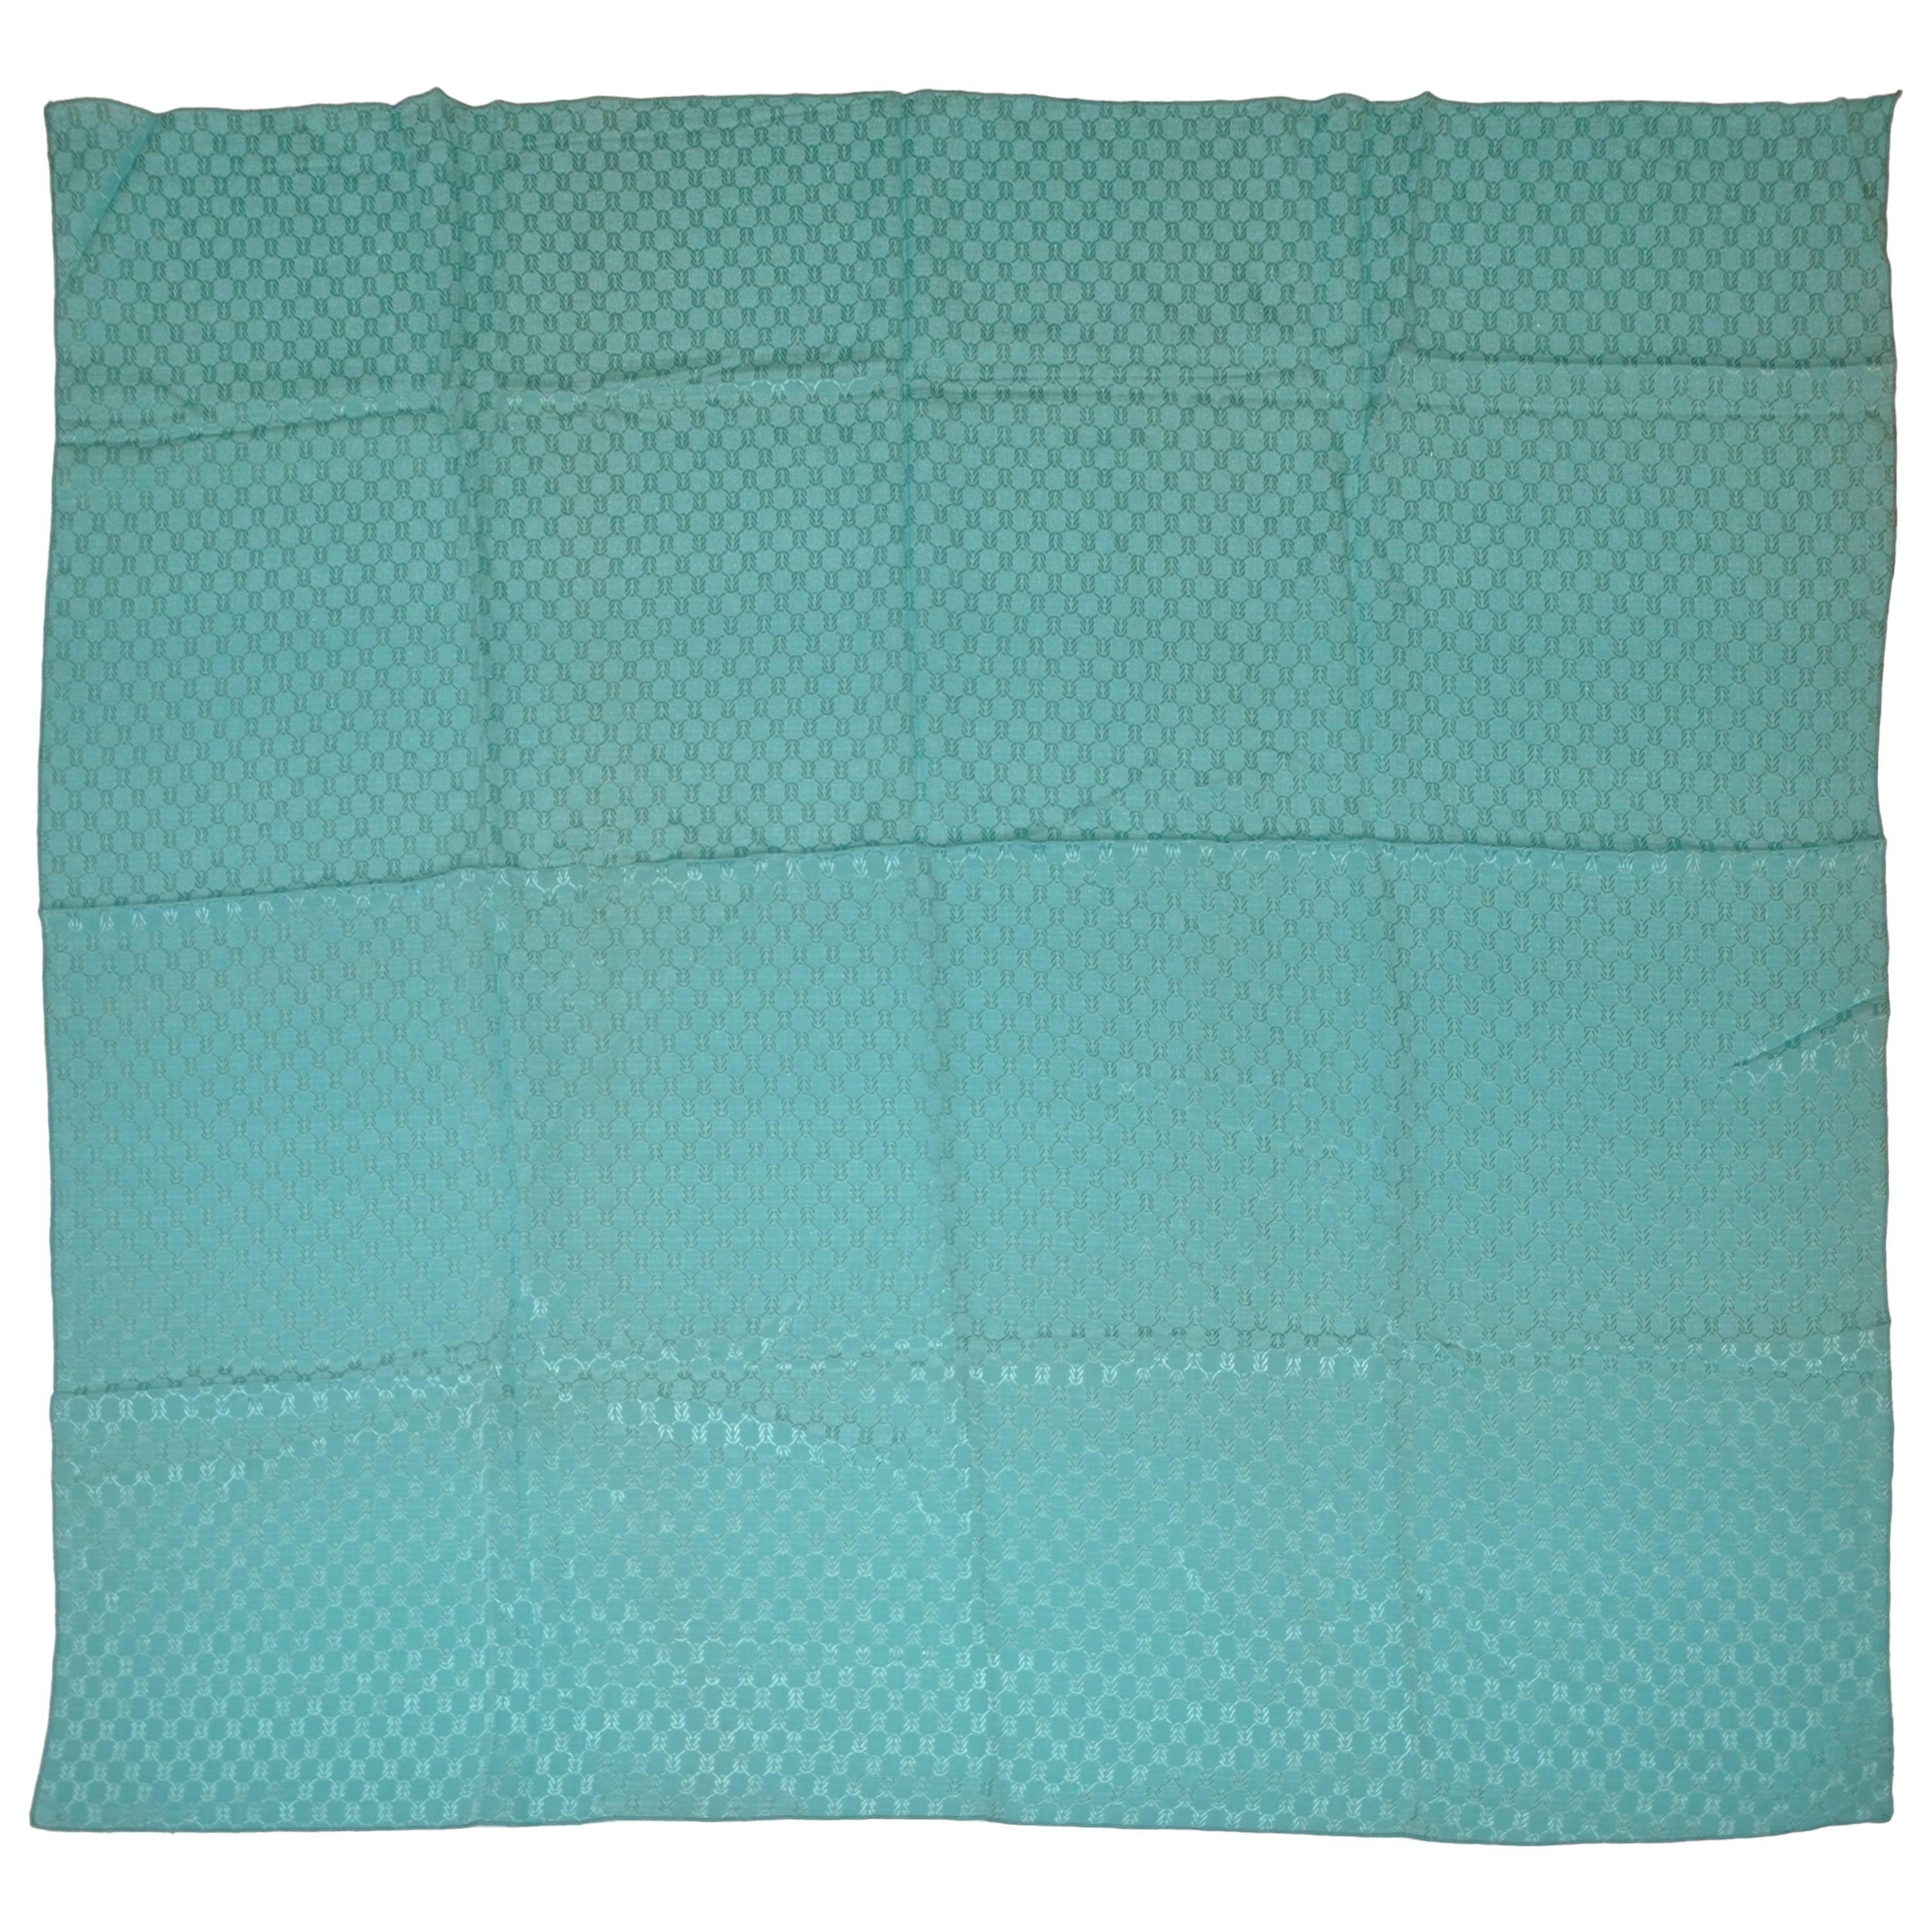 Turquoise "Hand-Knotted" Textured Silk Crepe Di Chine Scarf For Sale